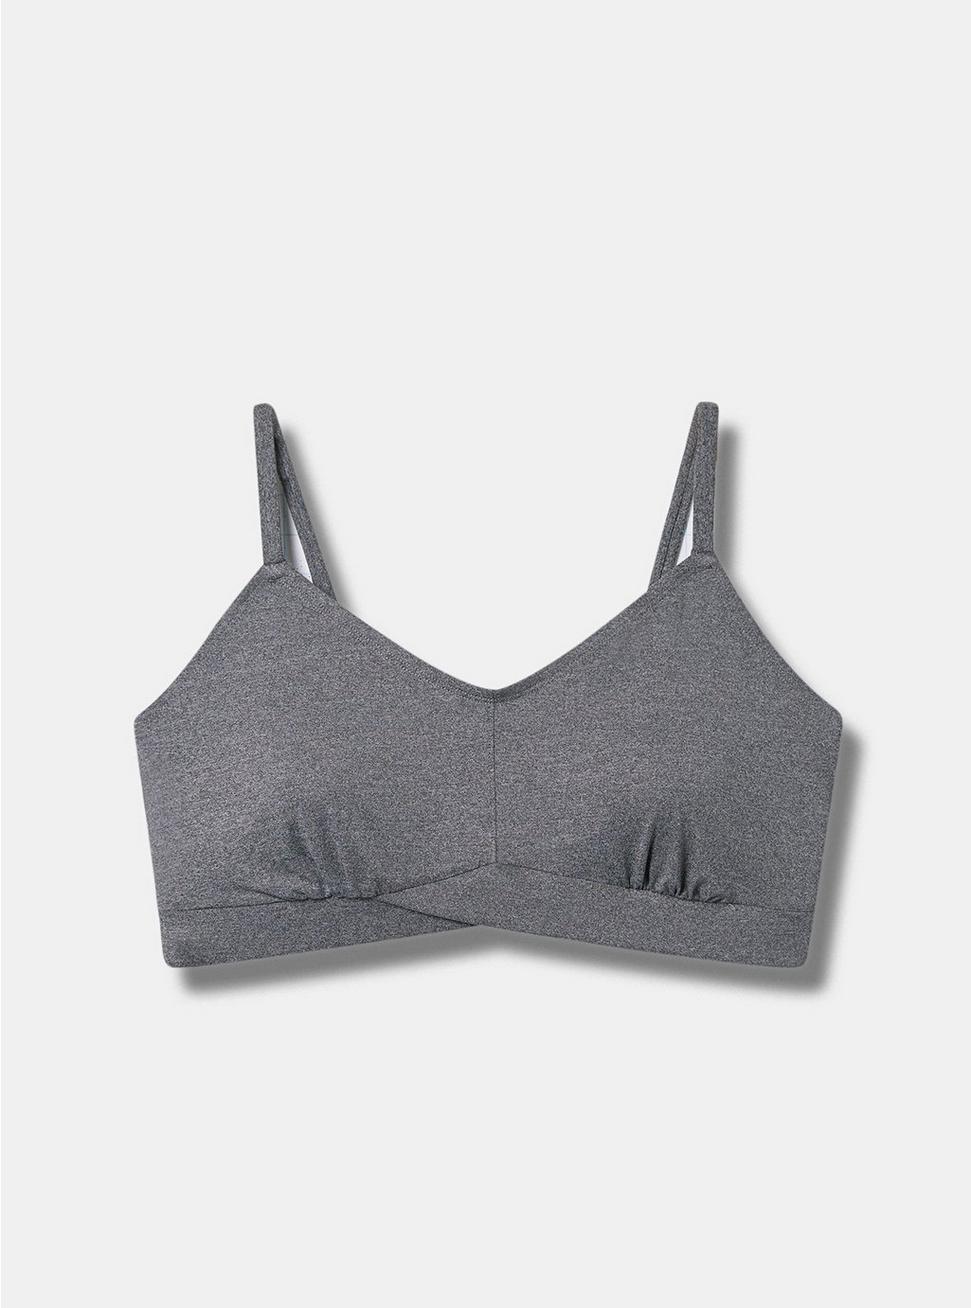 Plus Size Lightly Lined Heather Cross Front Bralette, CHARCOAL HEATHER, hi-res